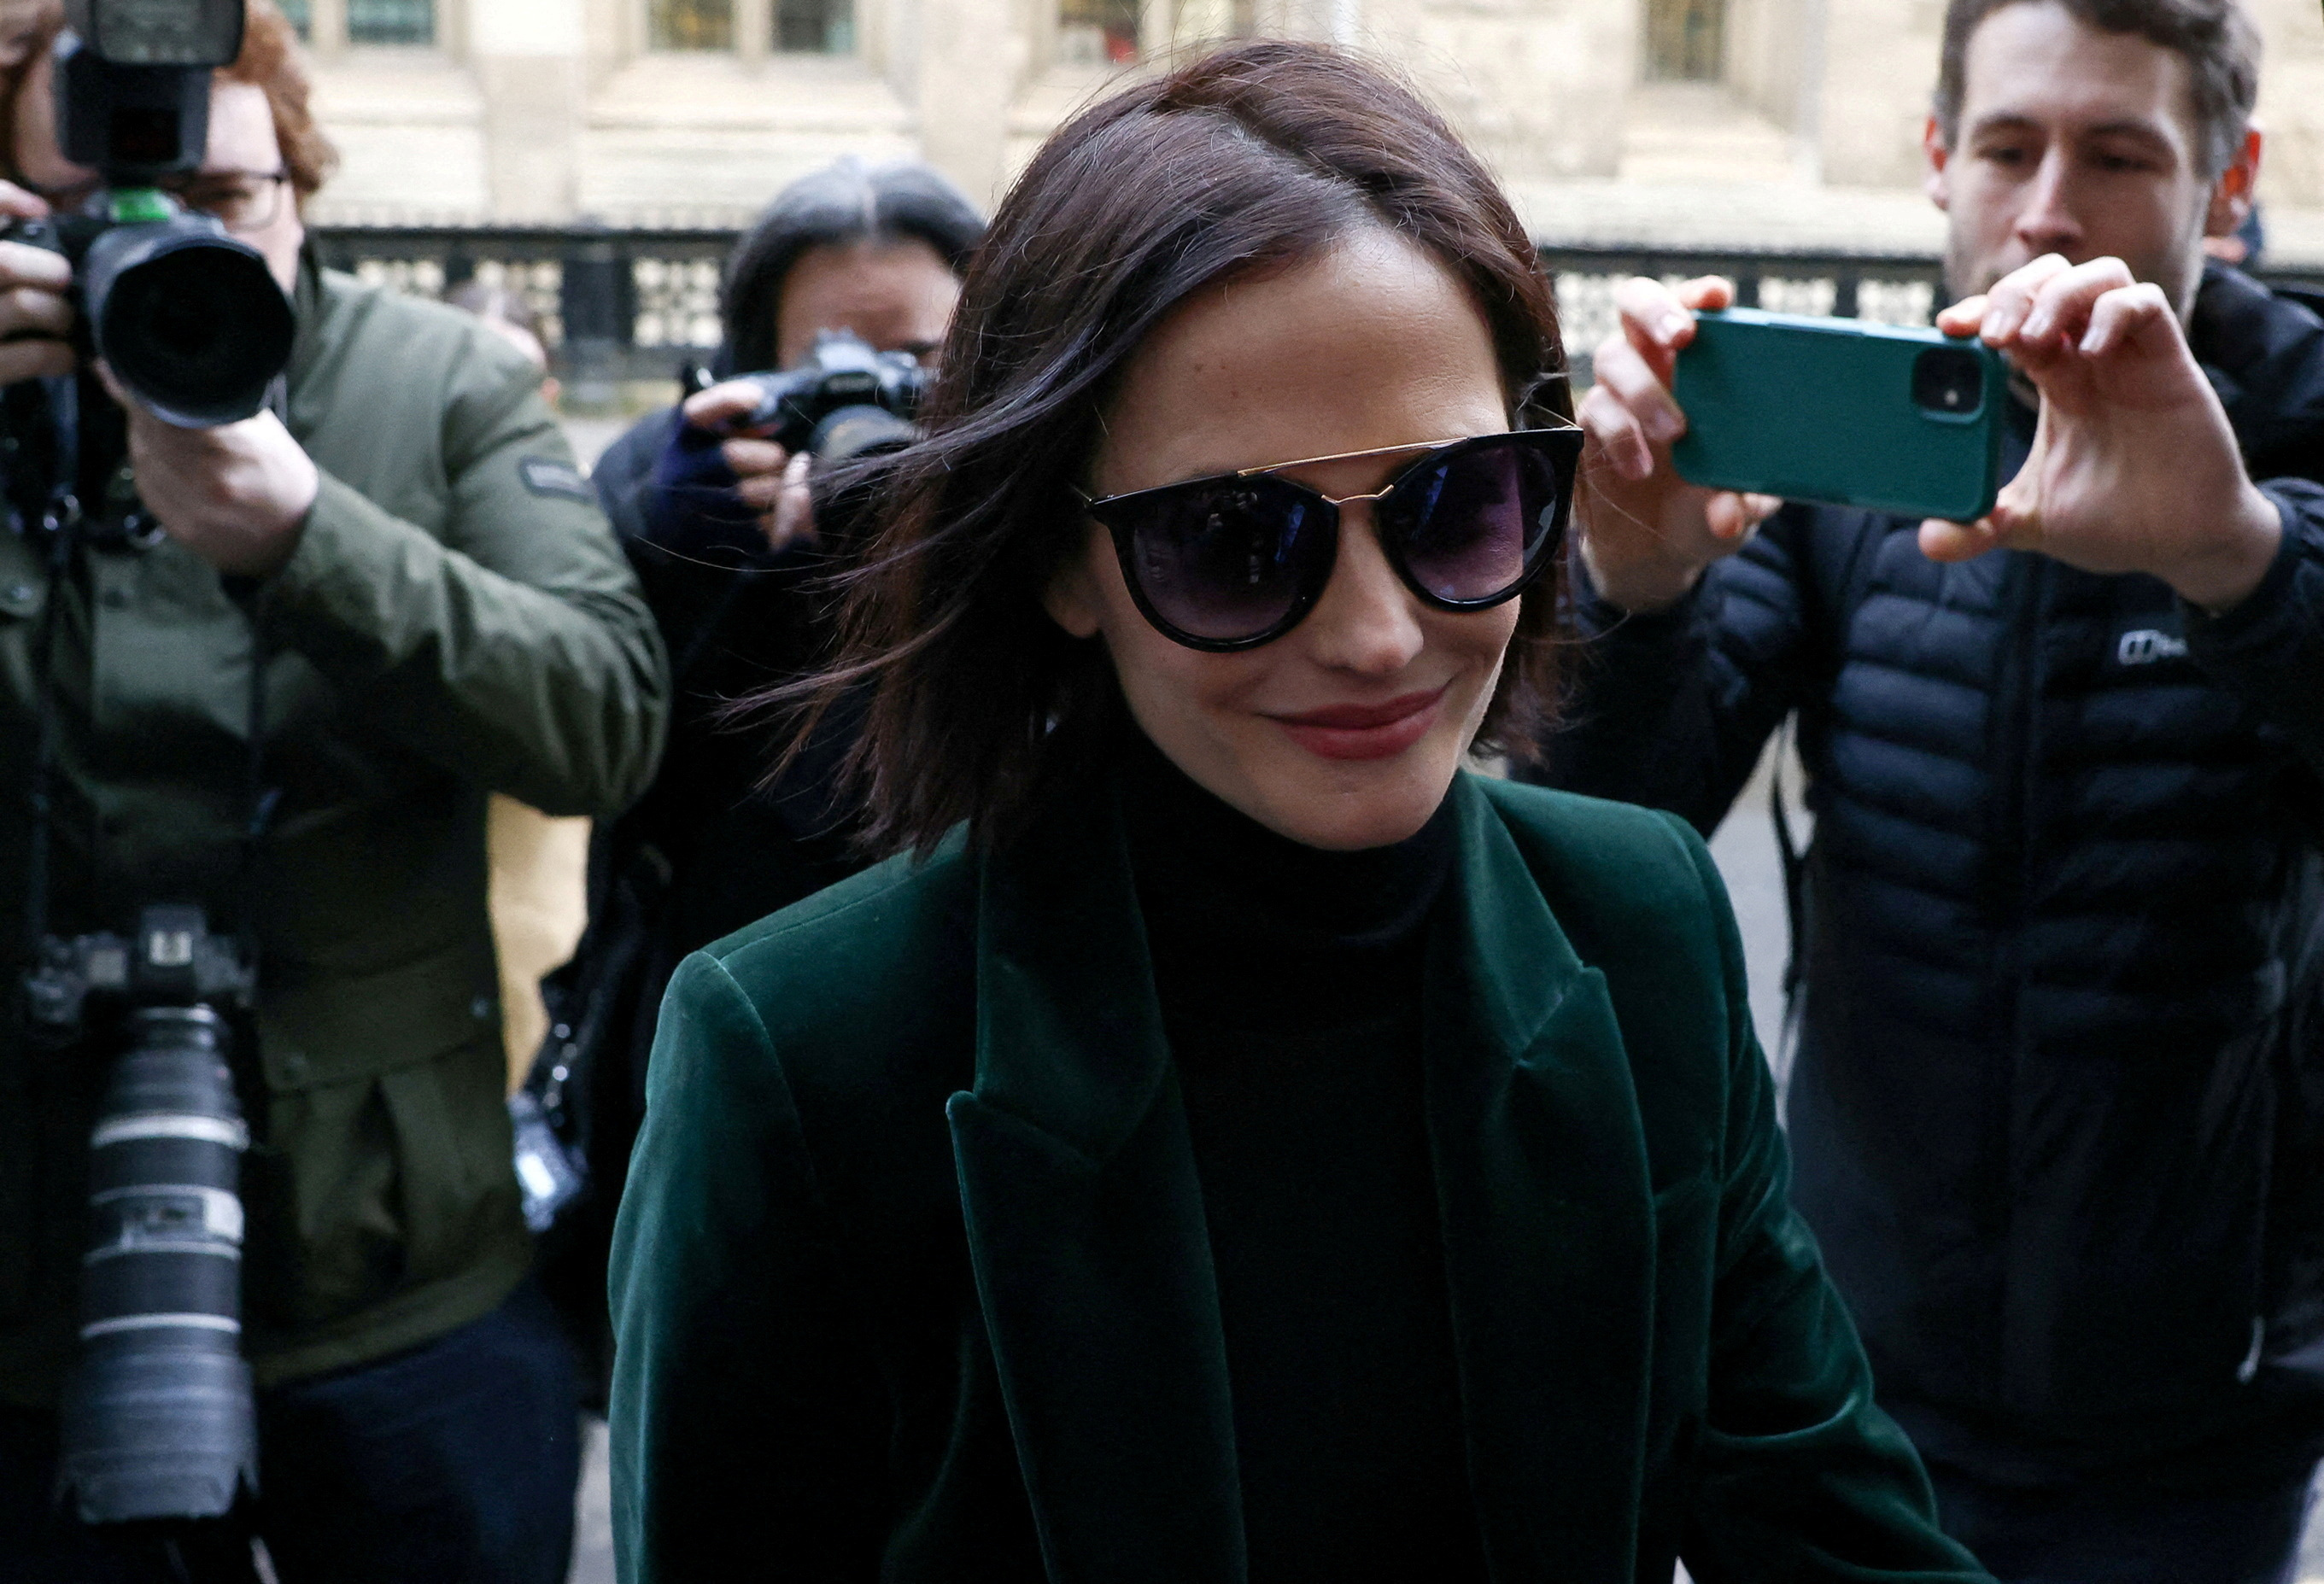 French actress Eva Green arrives at The Rolls Building courthouse in London